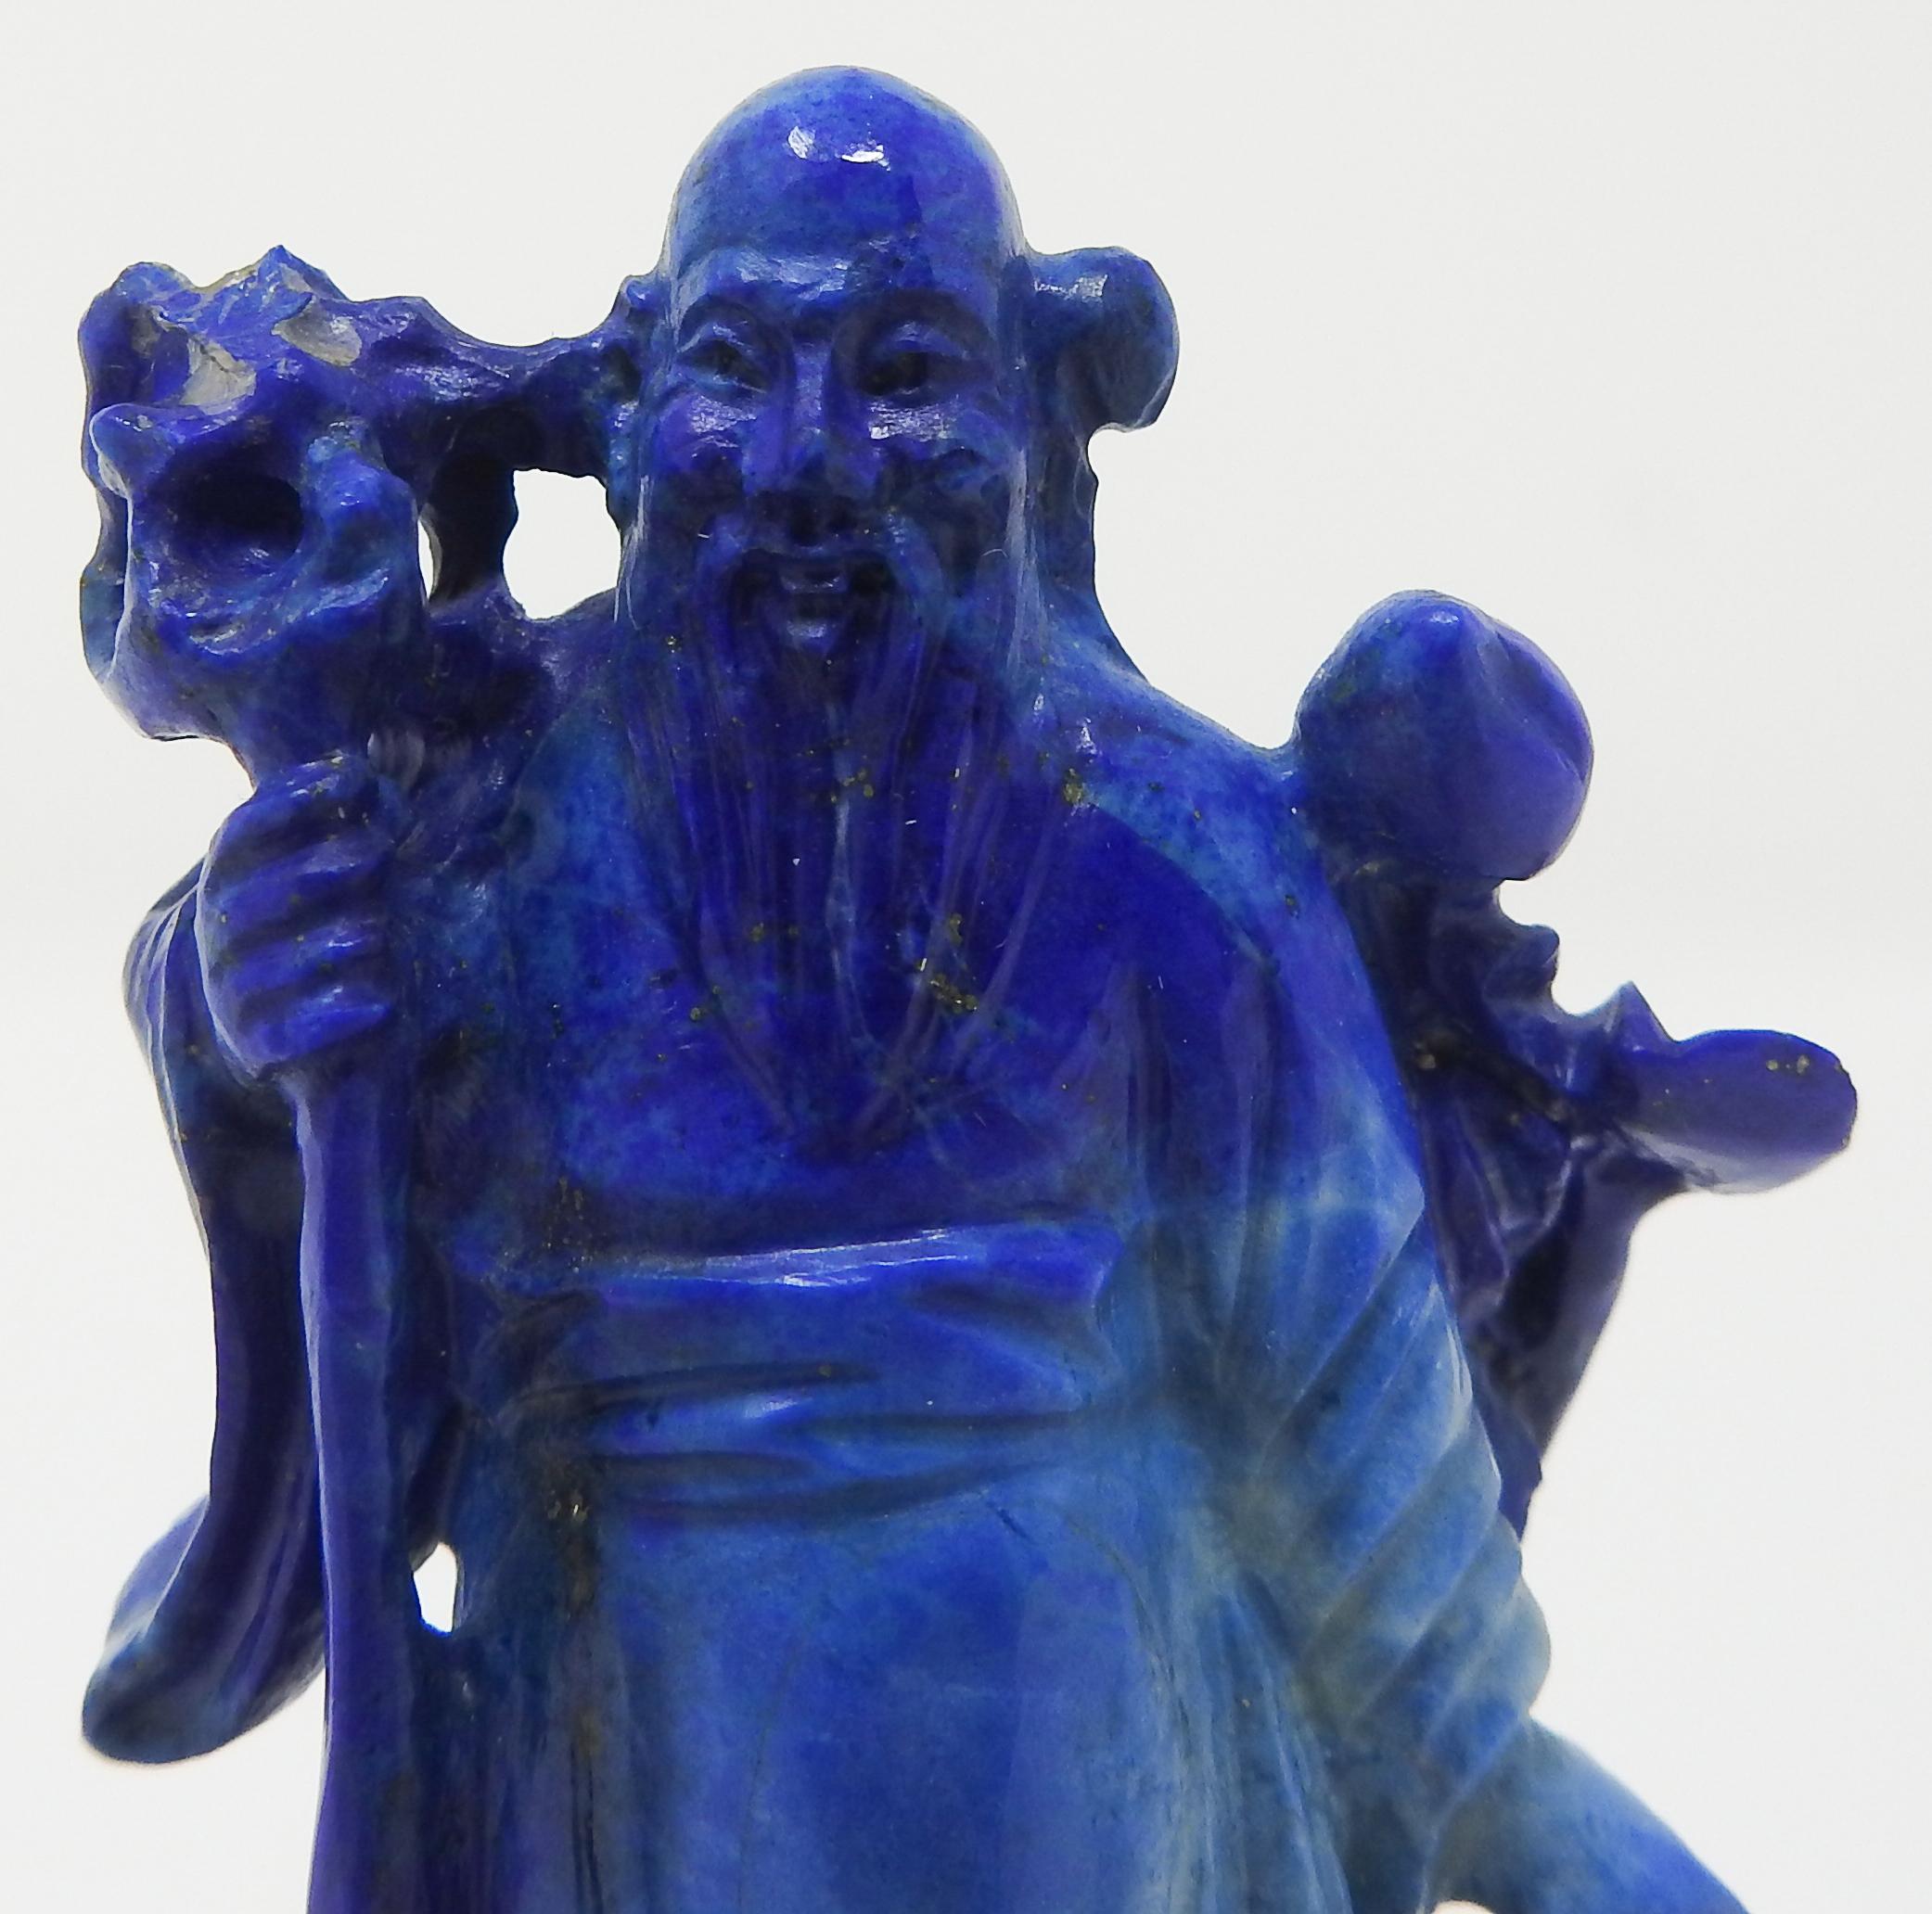 Offering this stunning piece of Lapis Lazuli carved Shou Lao figure from China. He starts on a simple wooden base that has silver inlay. The Shou Lao is gorgeously carved in robes and in one hand has a floral, and the other holding his staff. The